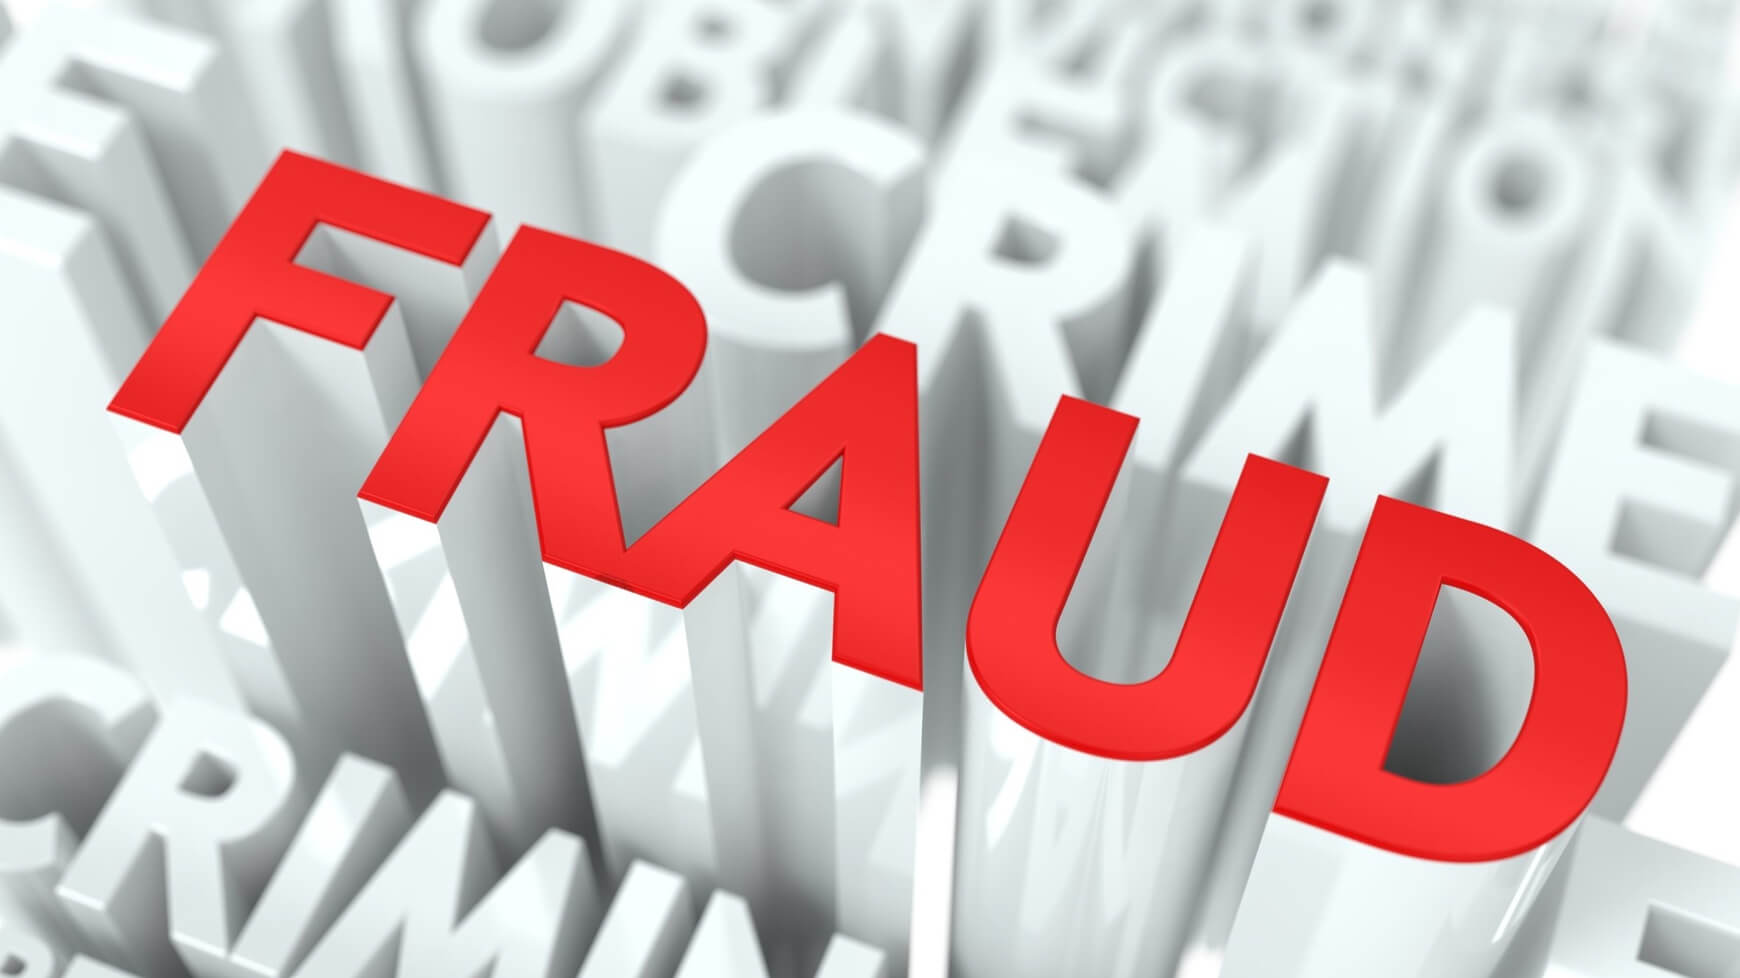 California Insurance Agent, Unlicensed Employee Arraigned for Alleged Fraud